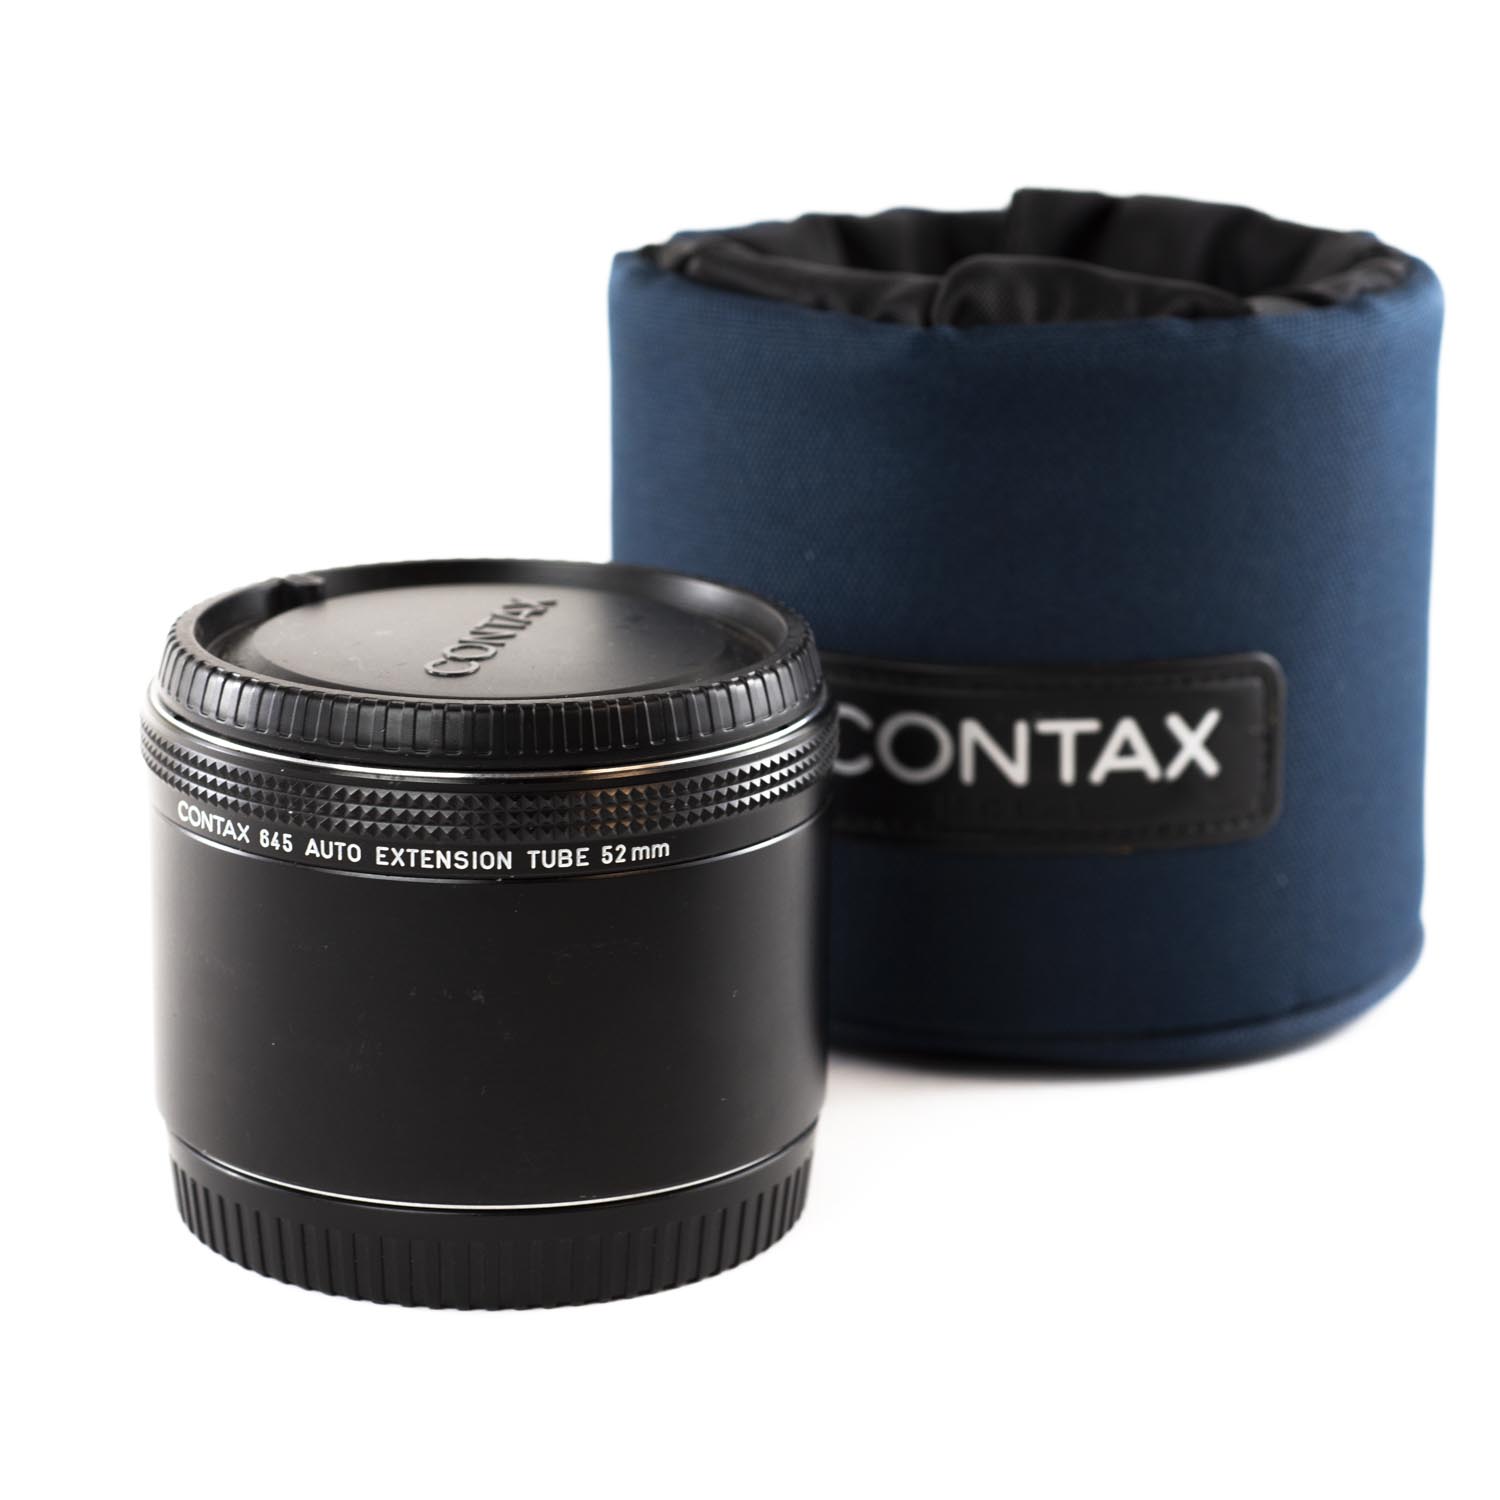 TThumbnail image for Carl Zeiss Auto extension tube 52mm for Contax